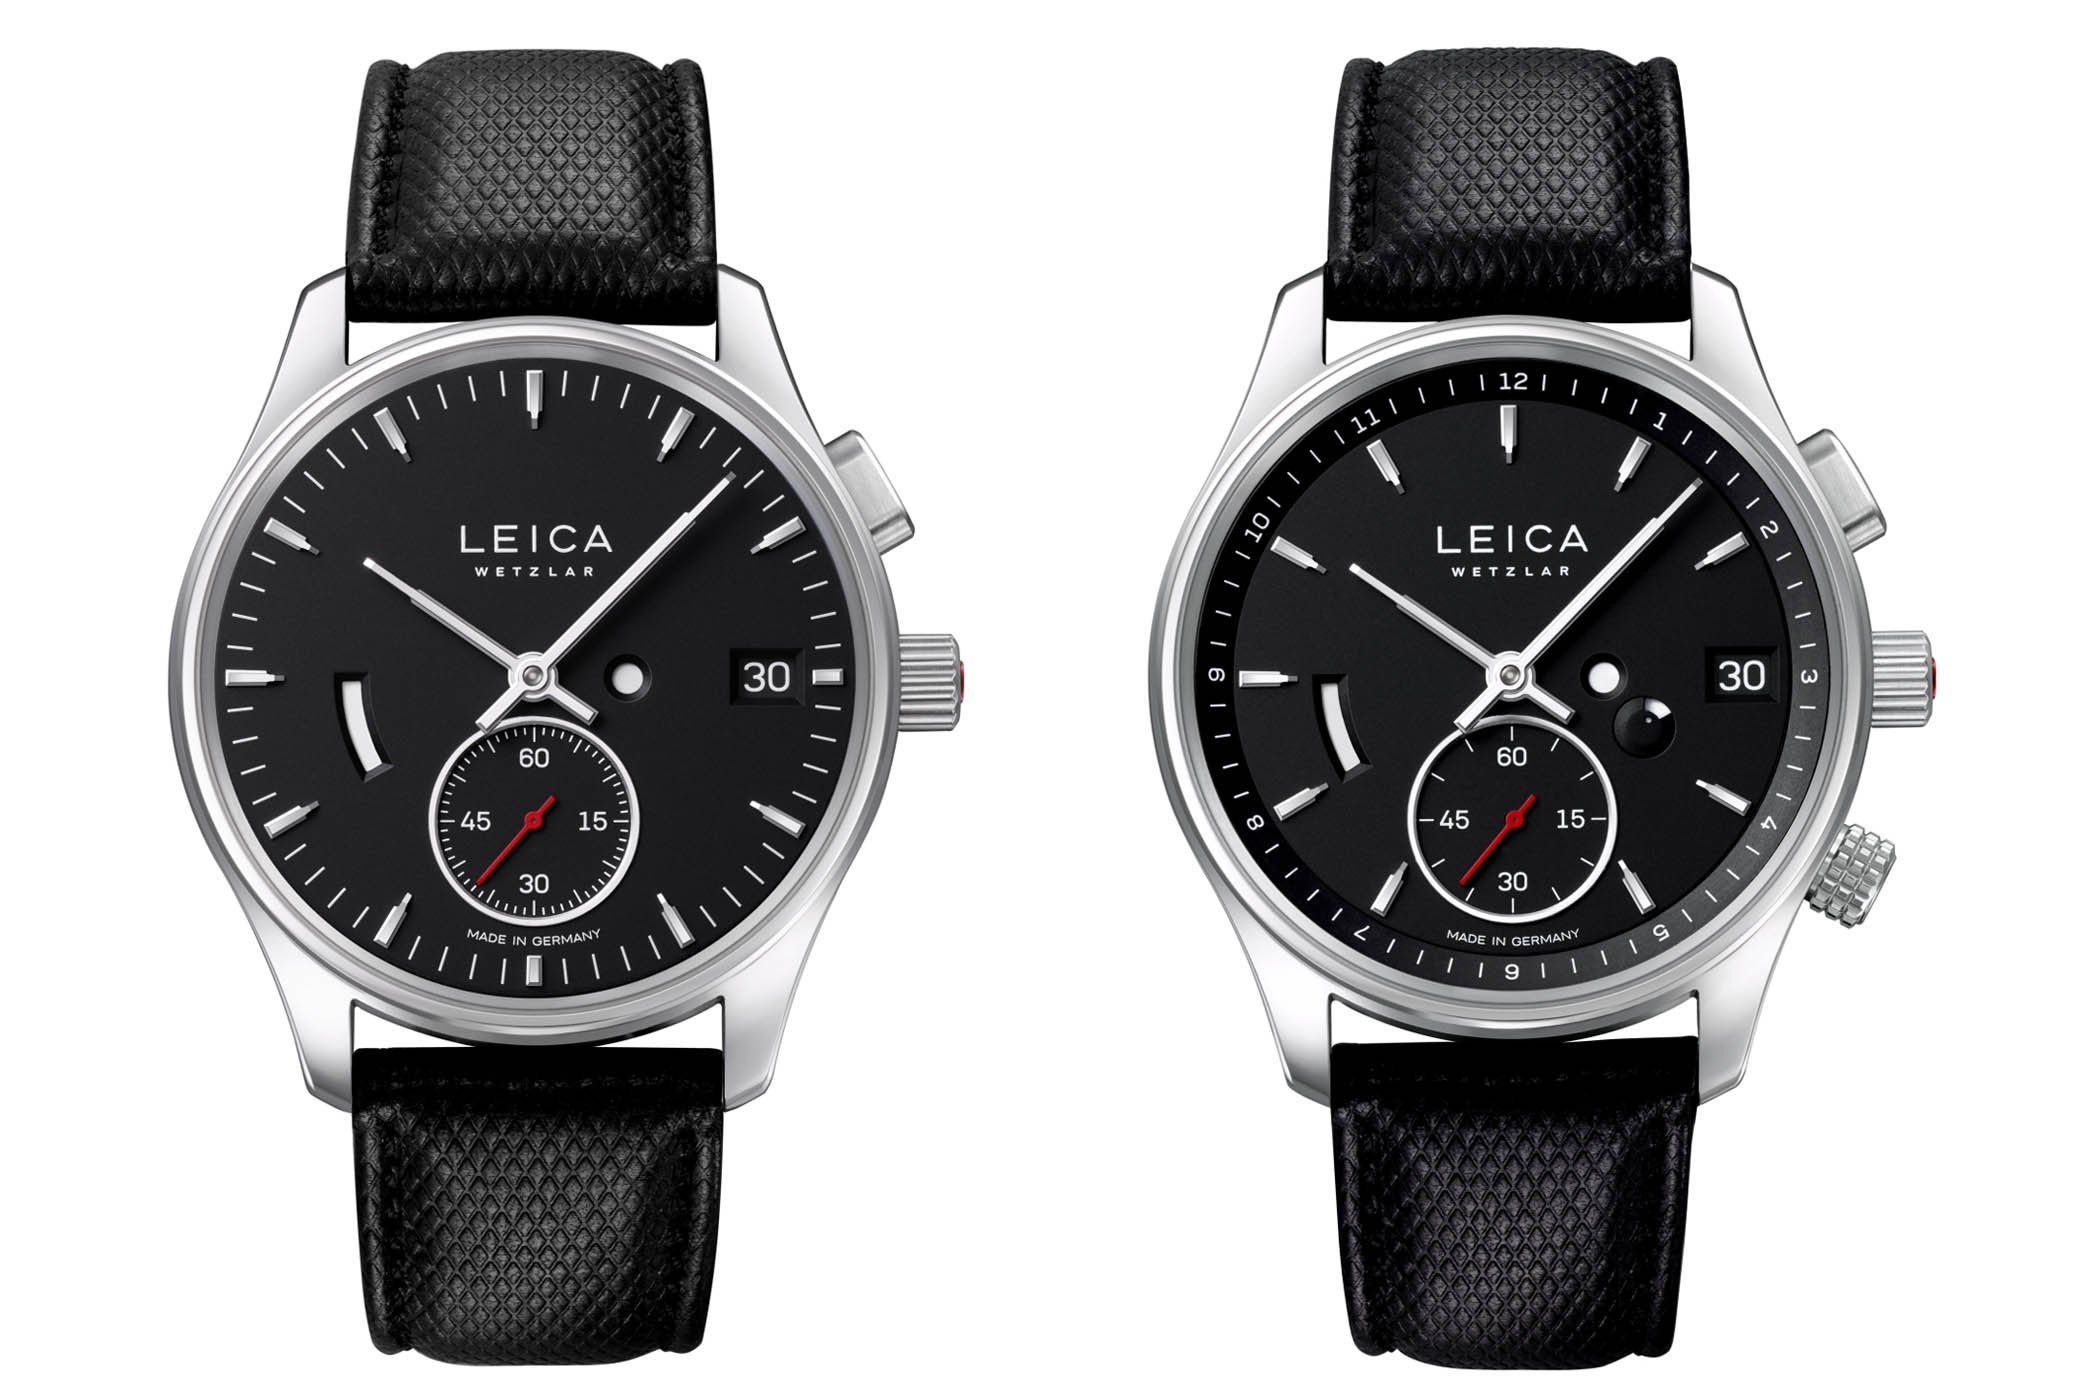 Leica L1 and Leica L2 watches